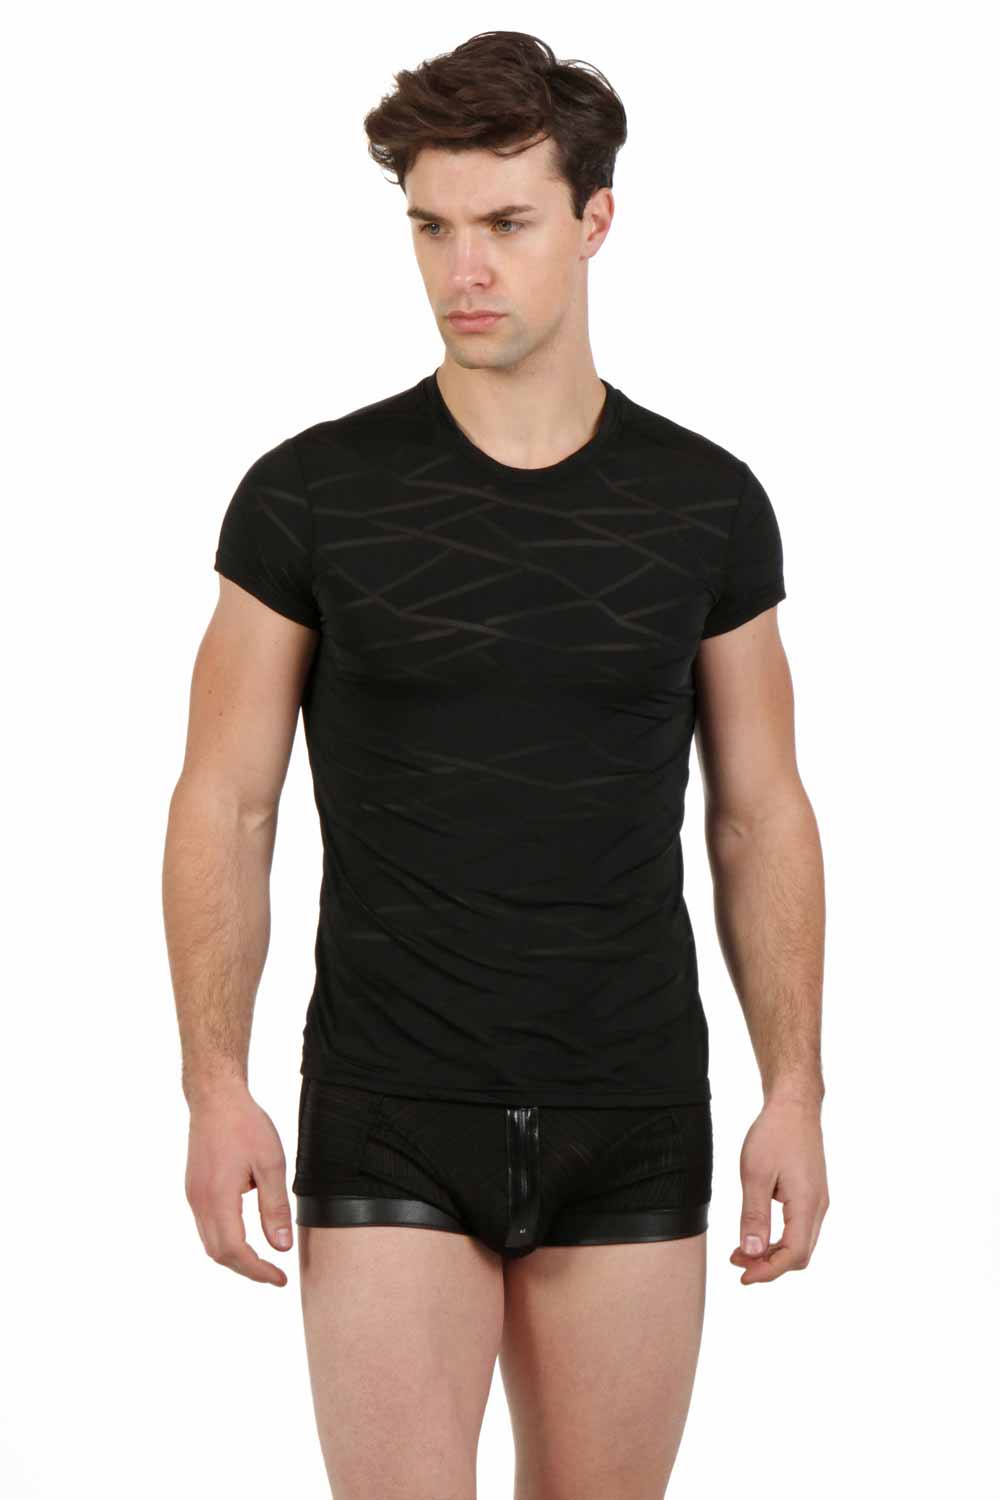 t-shirt-top-homme-maille-fine-9228b-02